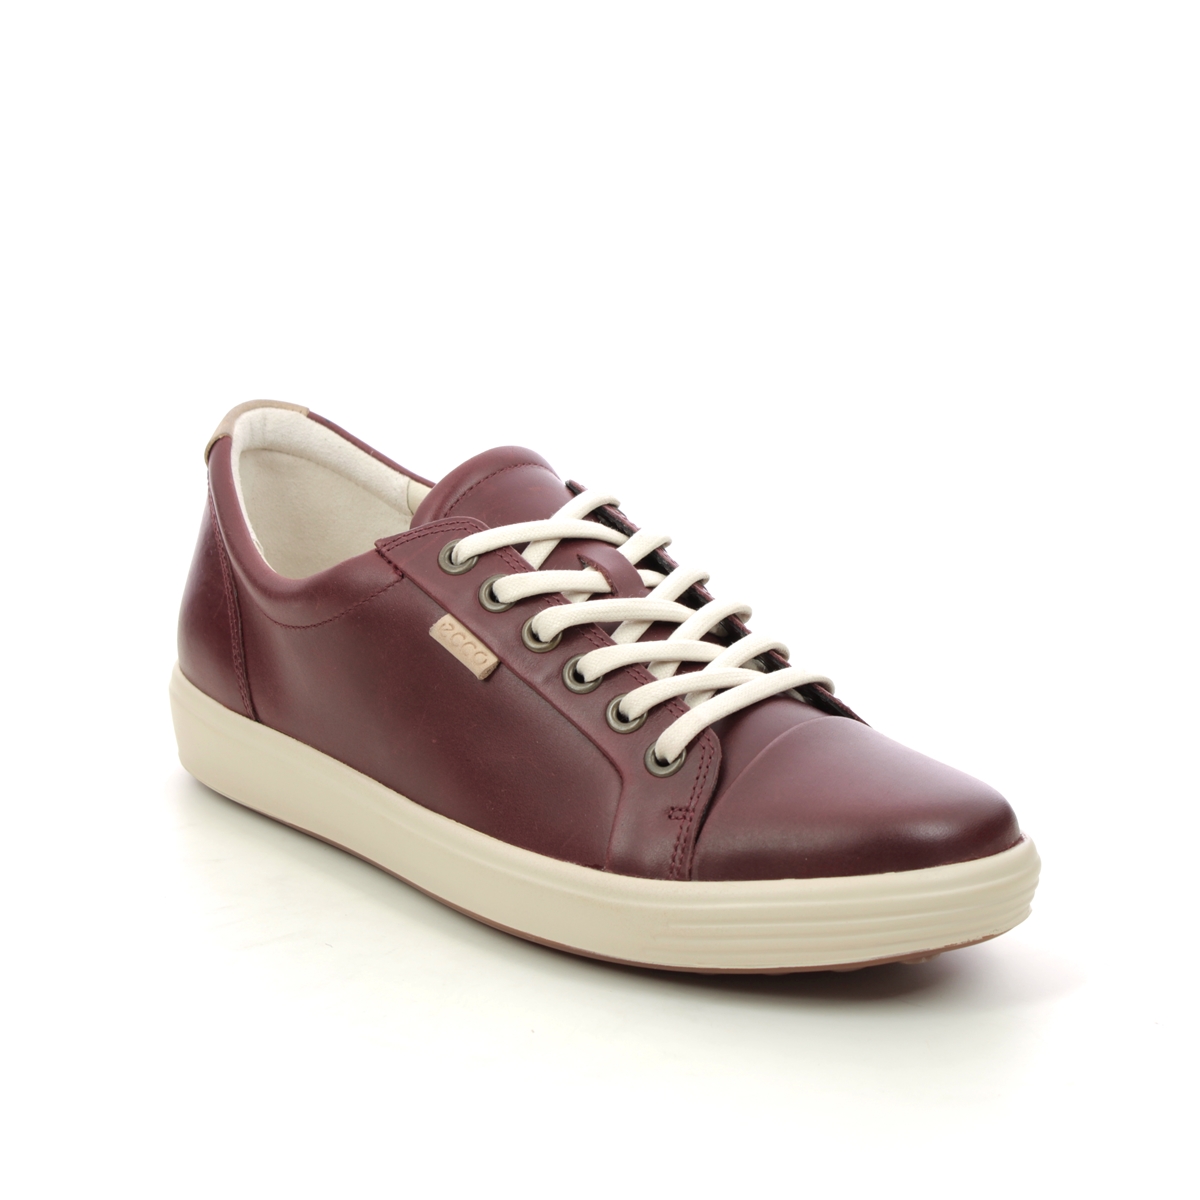 Ecco Soft 7 Lace Plum Womens Trainers 430003-01588 In Size 41 In Plain Plum